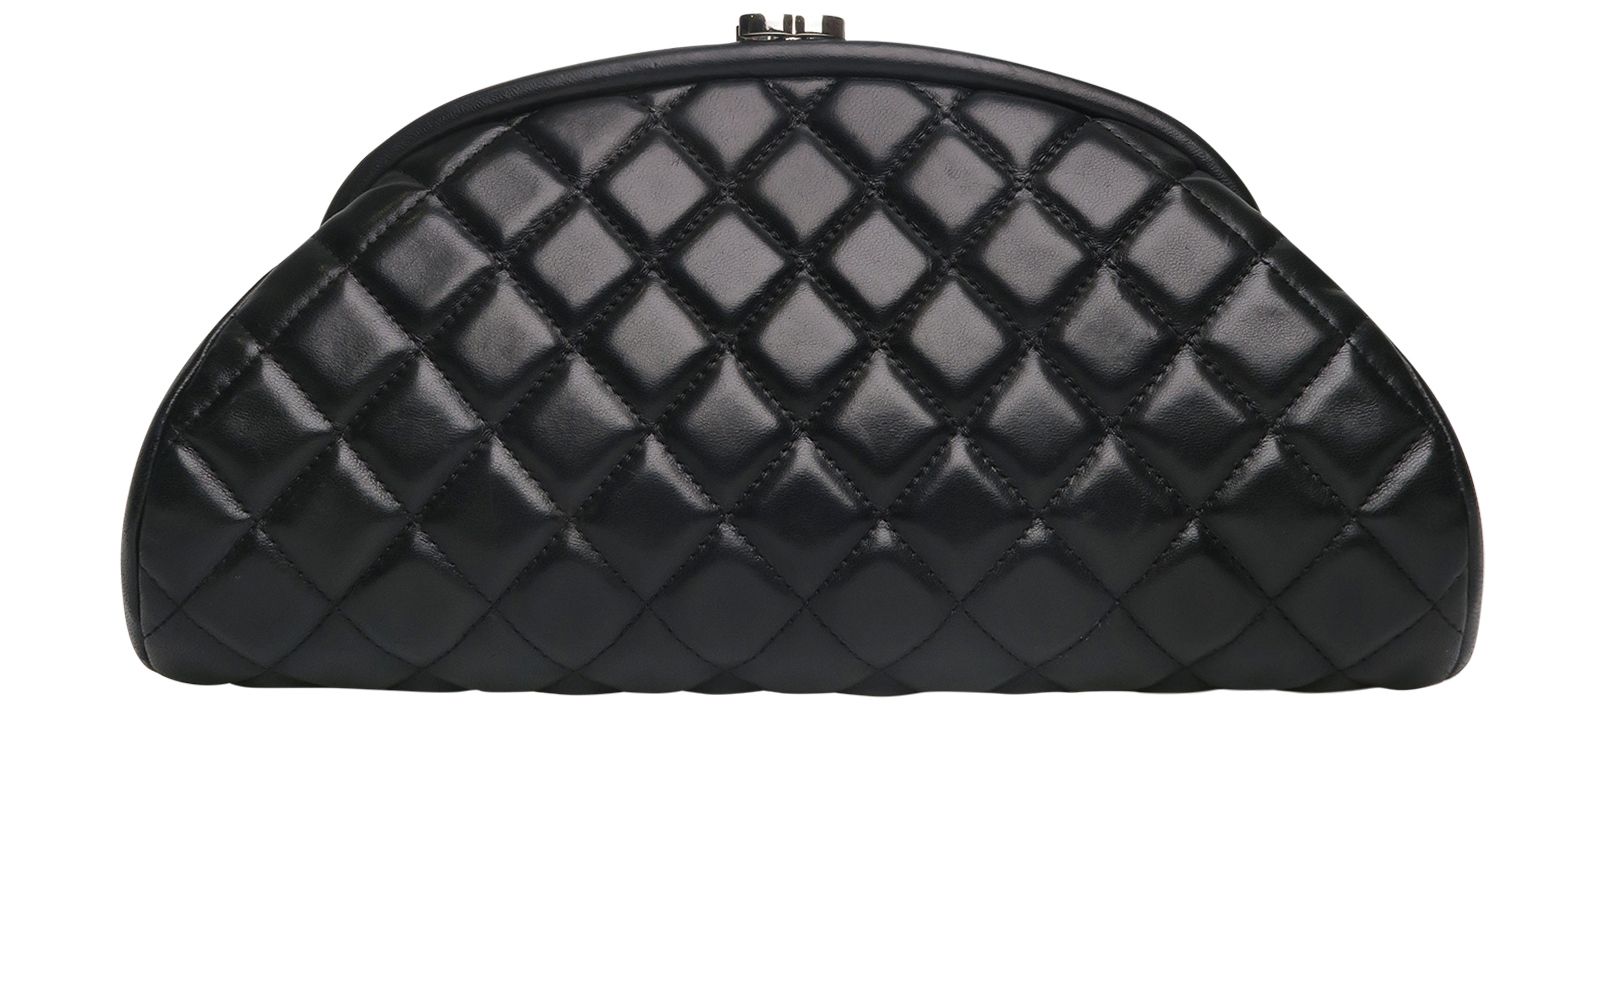 Chanel Half Moon Quilted Clutch Bag